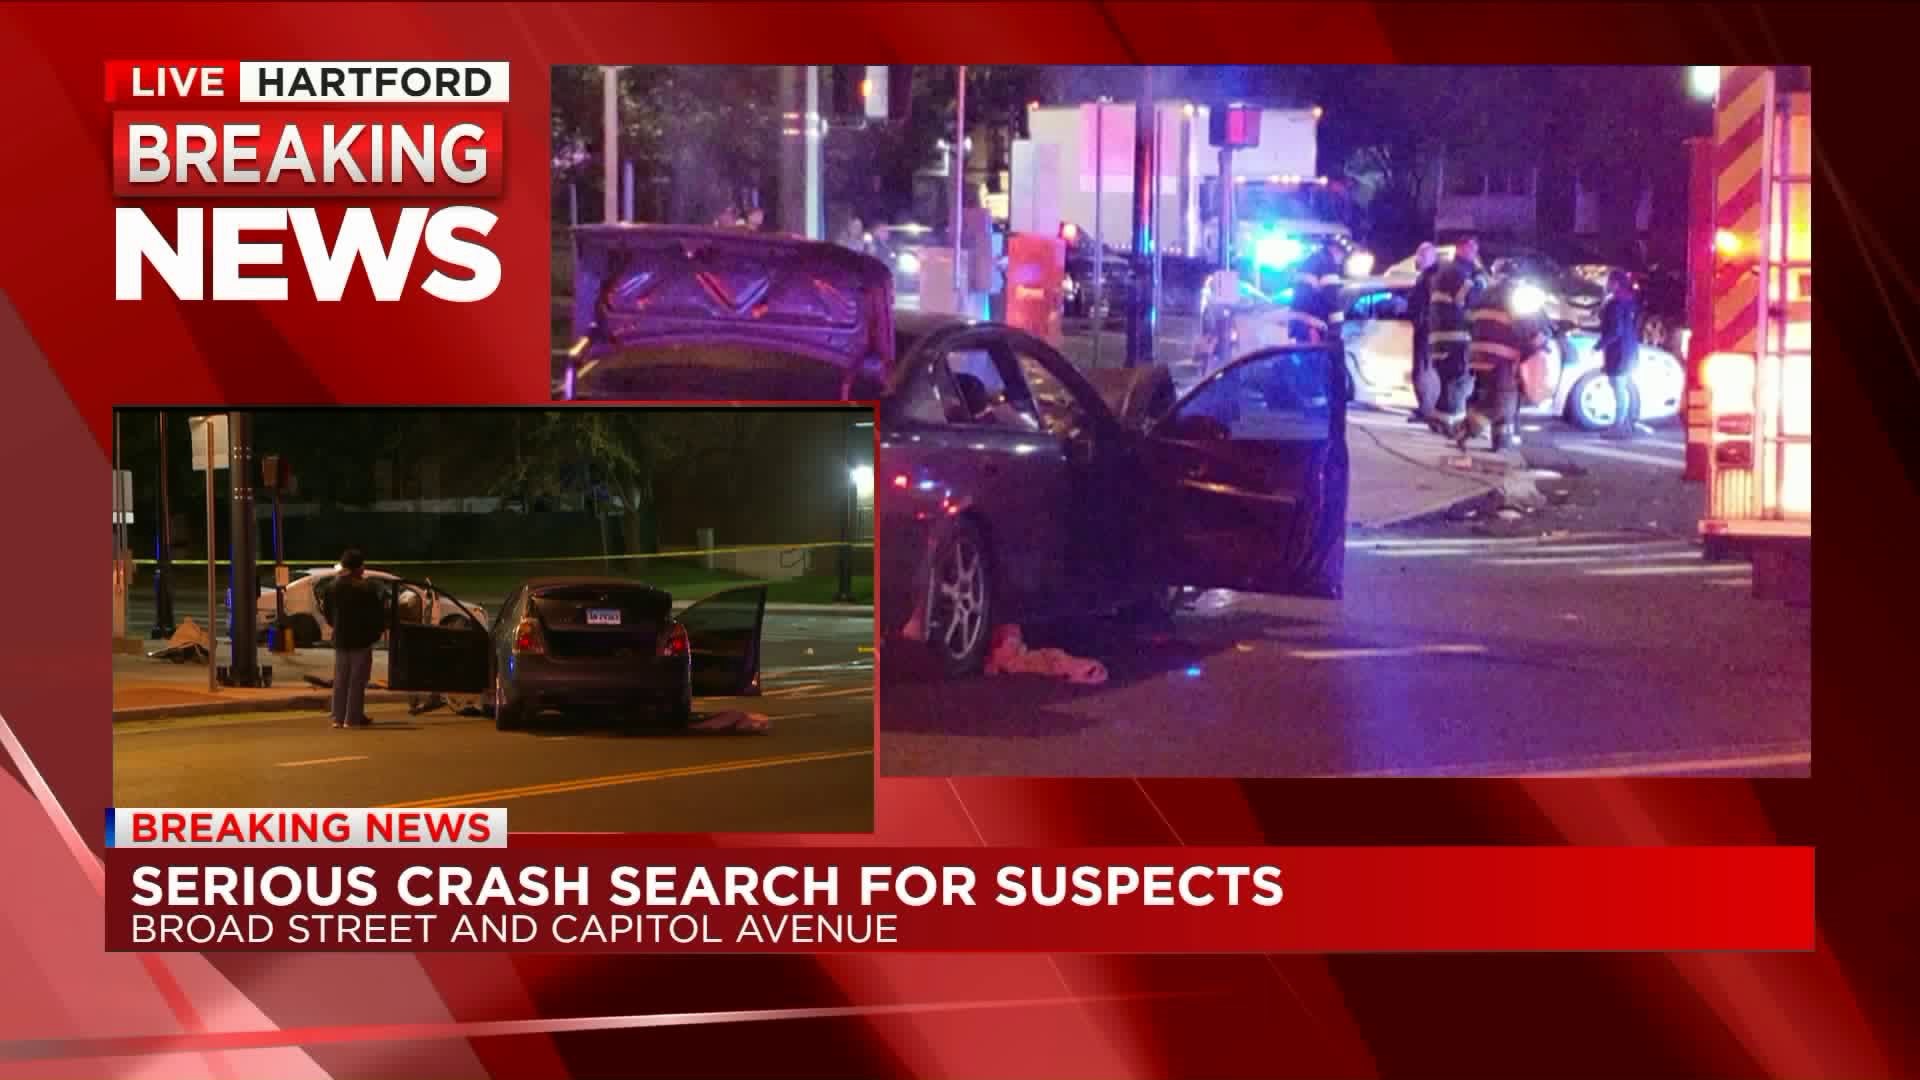 Hartford Crash, Search for Suspects 11pm update